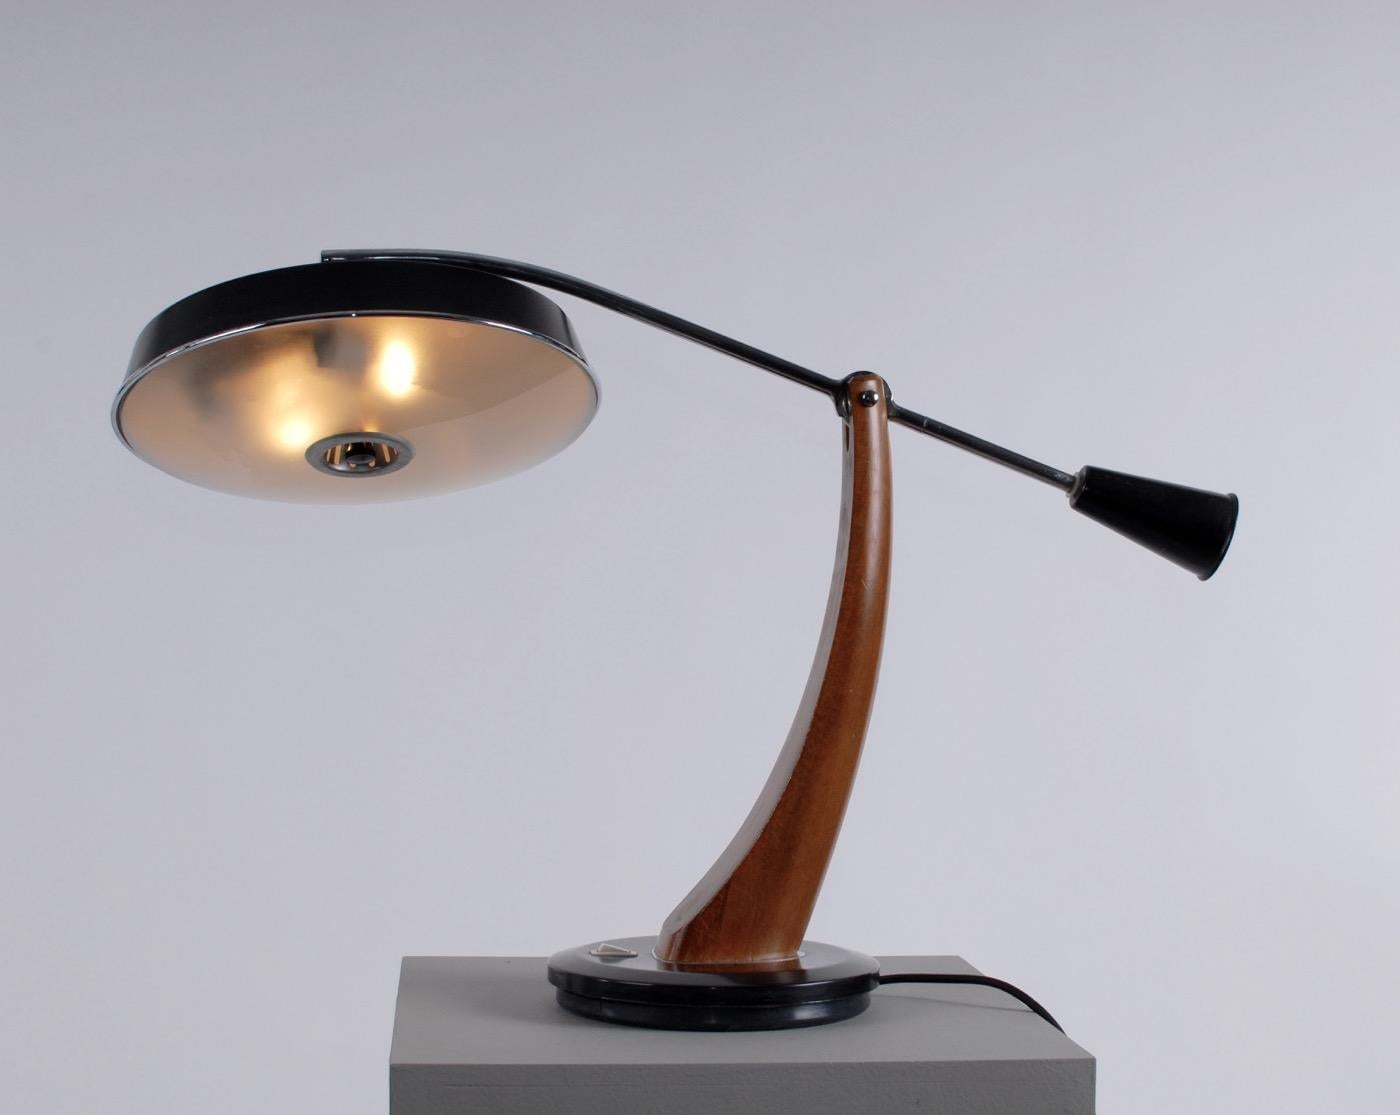 Spanish Mid-Century Modern adjustable metal and oak desk table lamp by Fase.
Manufactured by Fase Spain 1960s lamp with lacquered oak stand on black metal base, chrome arm with counter balance weight, black shade with opaline glass. 2 light bulbs.